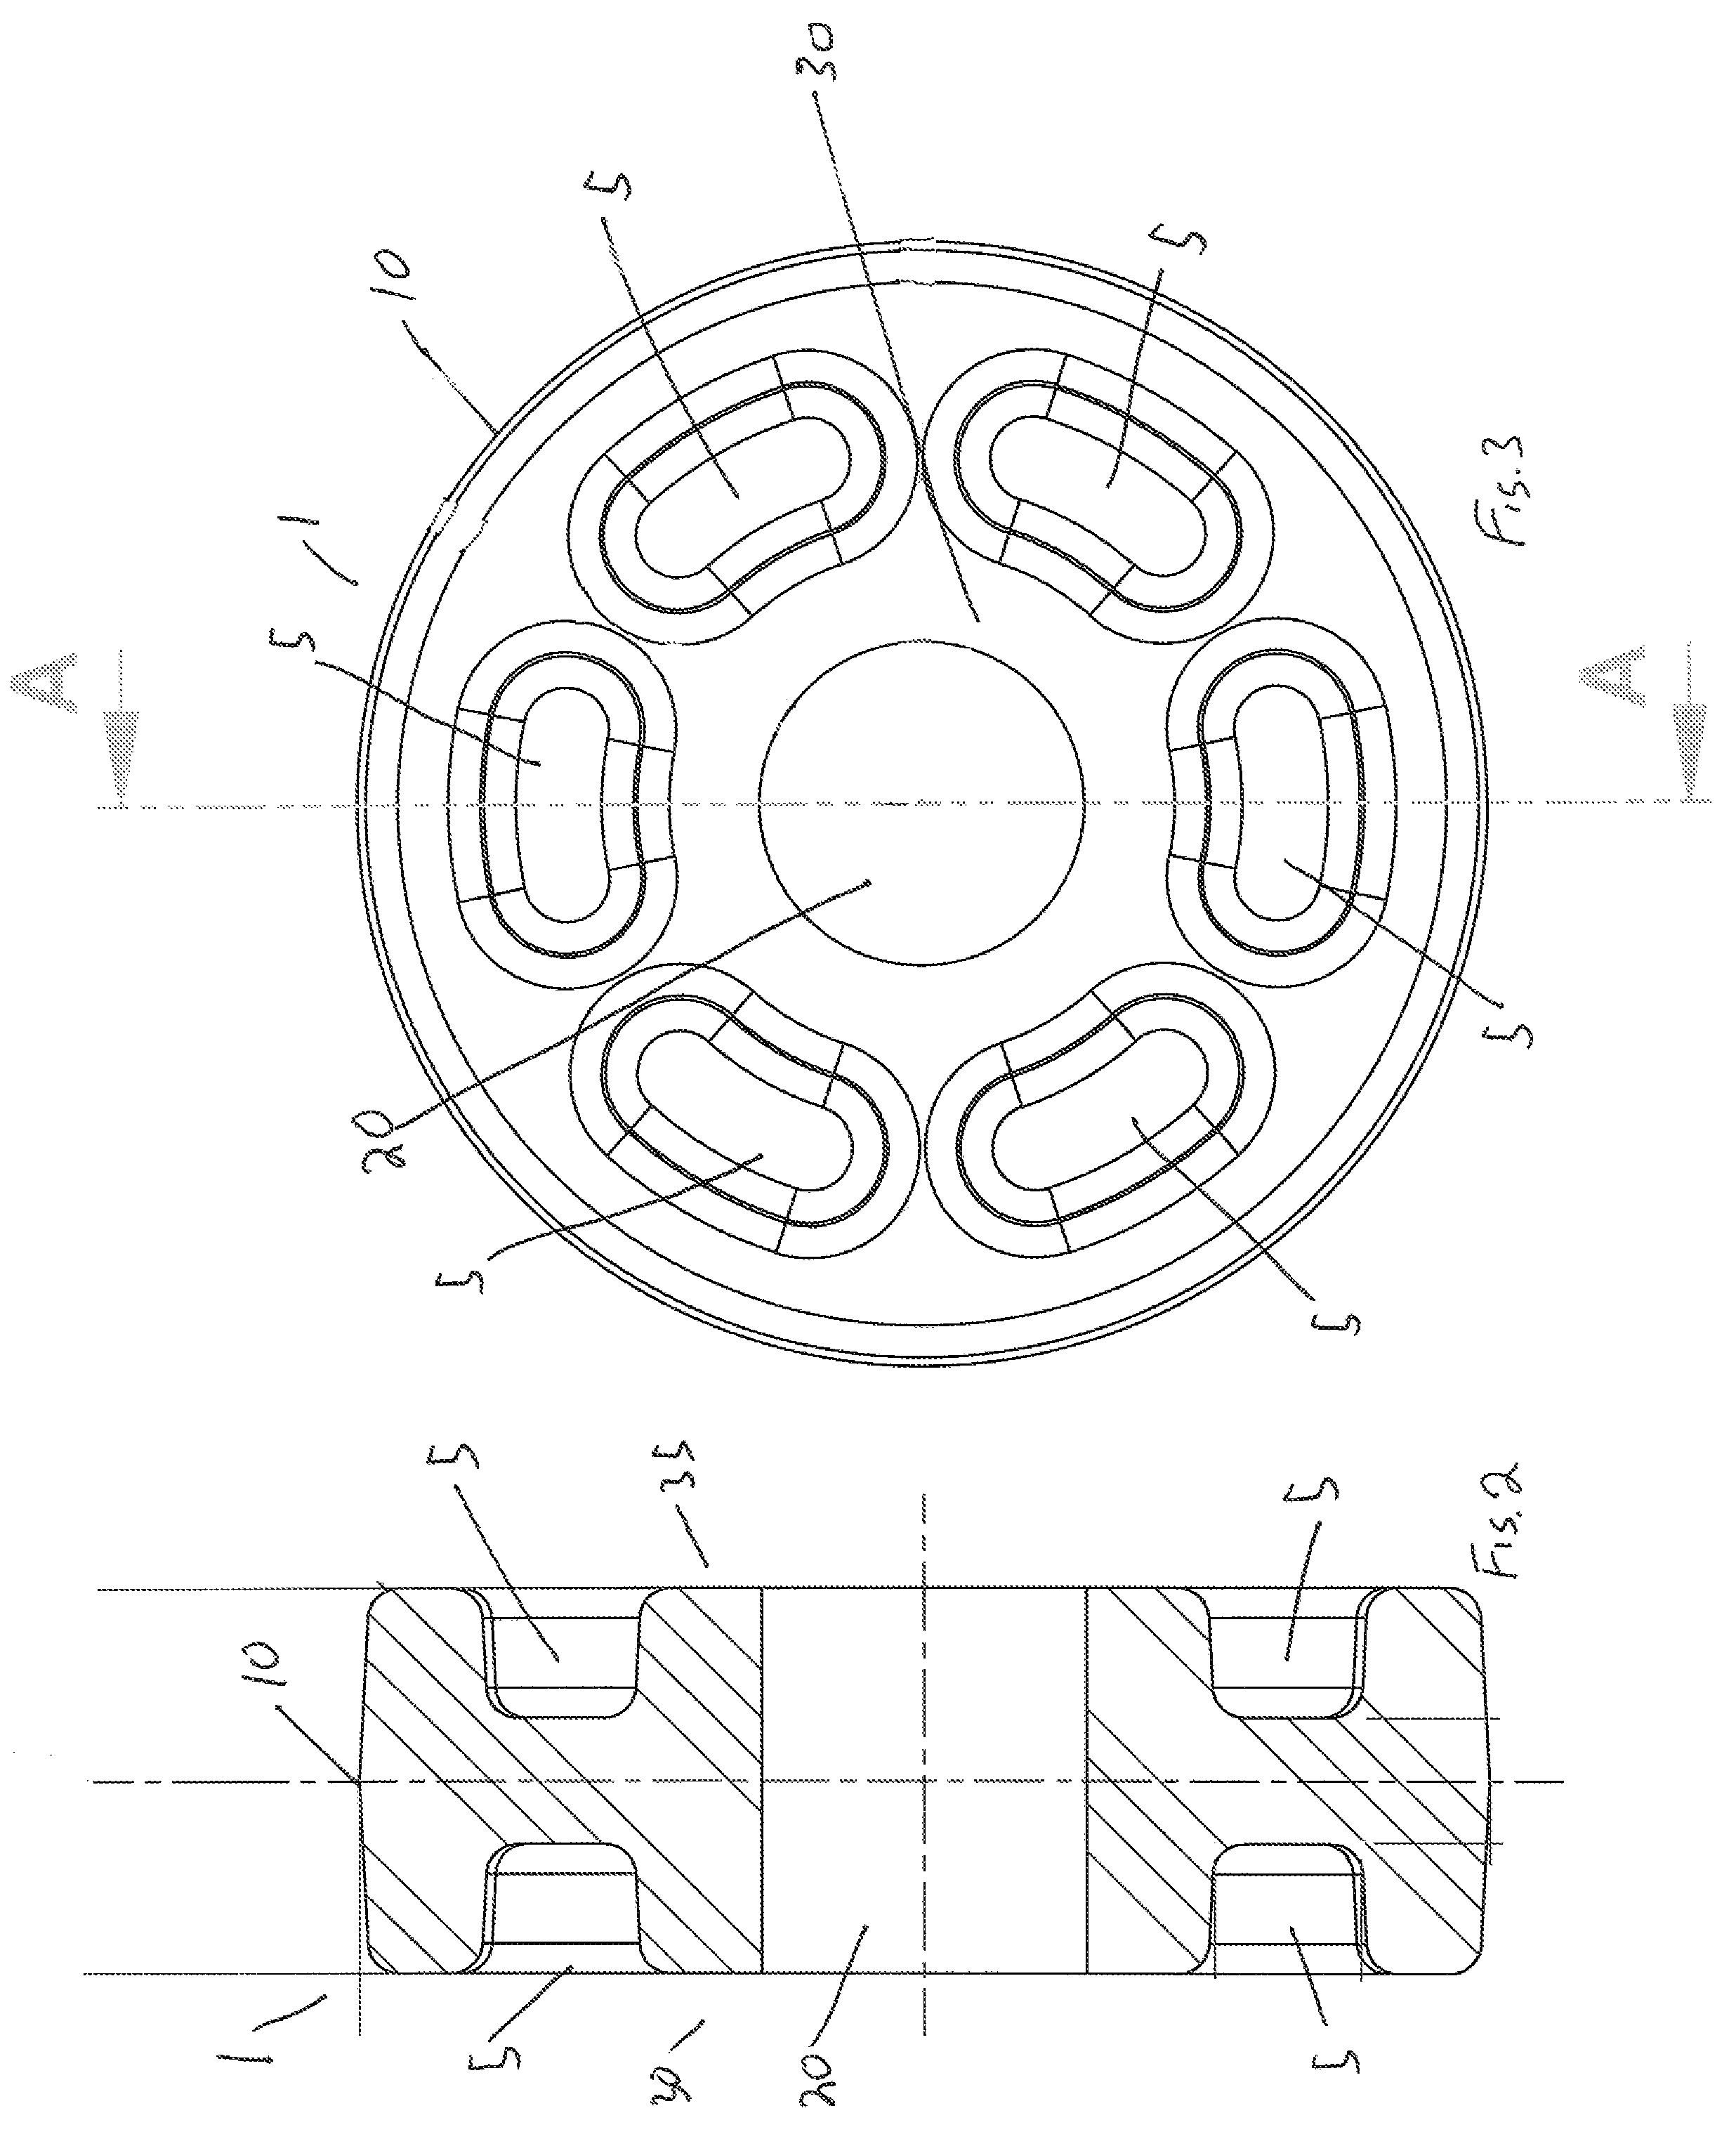 Coaxial RF device thermally conductive polymer insulator and method of manufacture